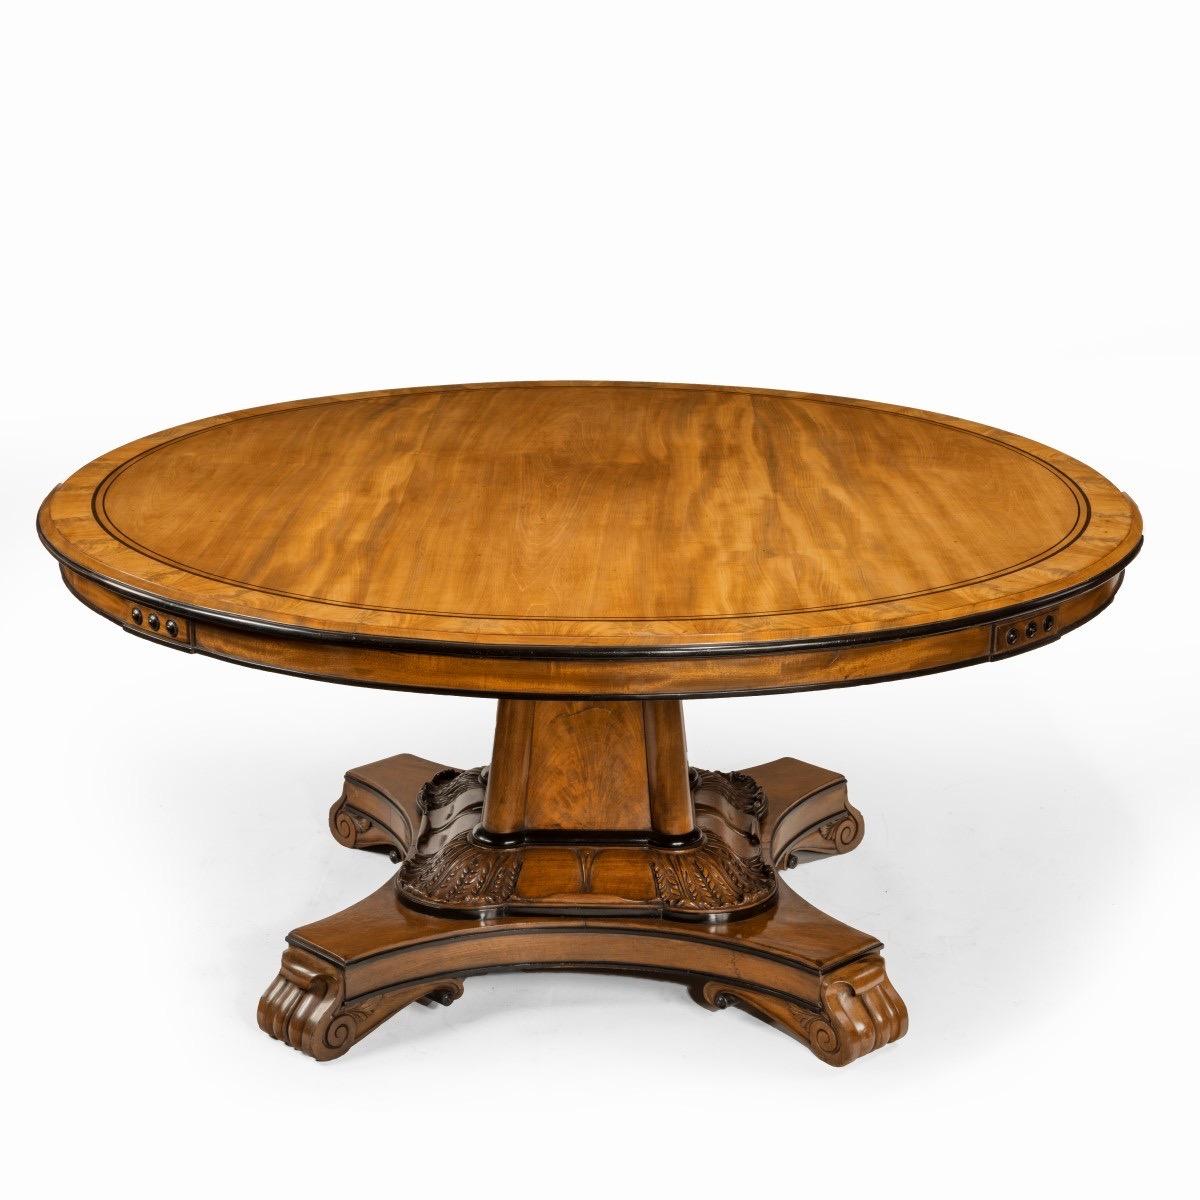 A George IV ebony-inlaid mahogany tilt-top centre table, the circular top with a flame-veneered cross-banded border above a moulded frieze with ebony stringing and four small rectangular plaques inset with three ebony buttons, all raised on a